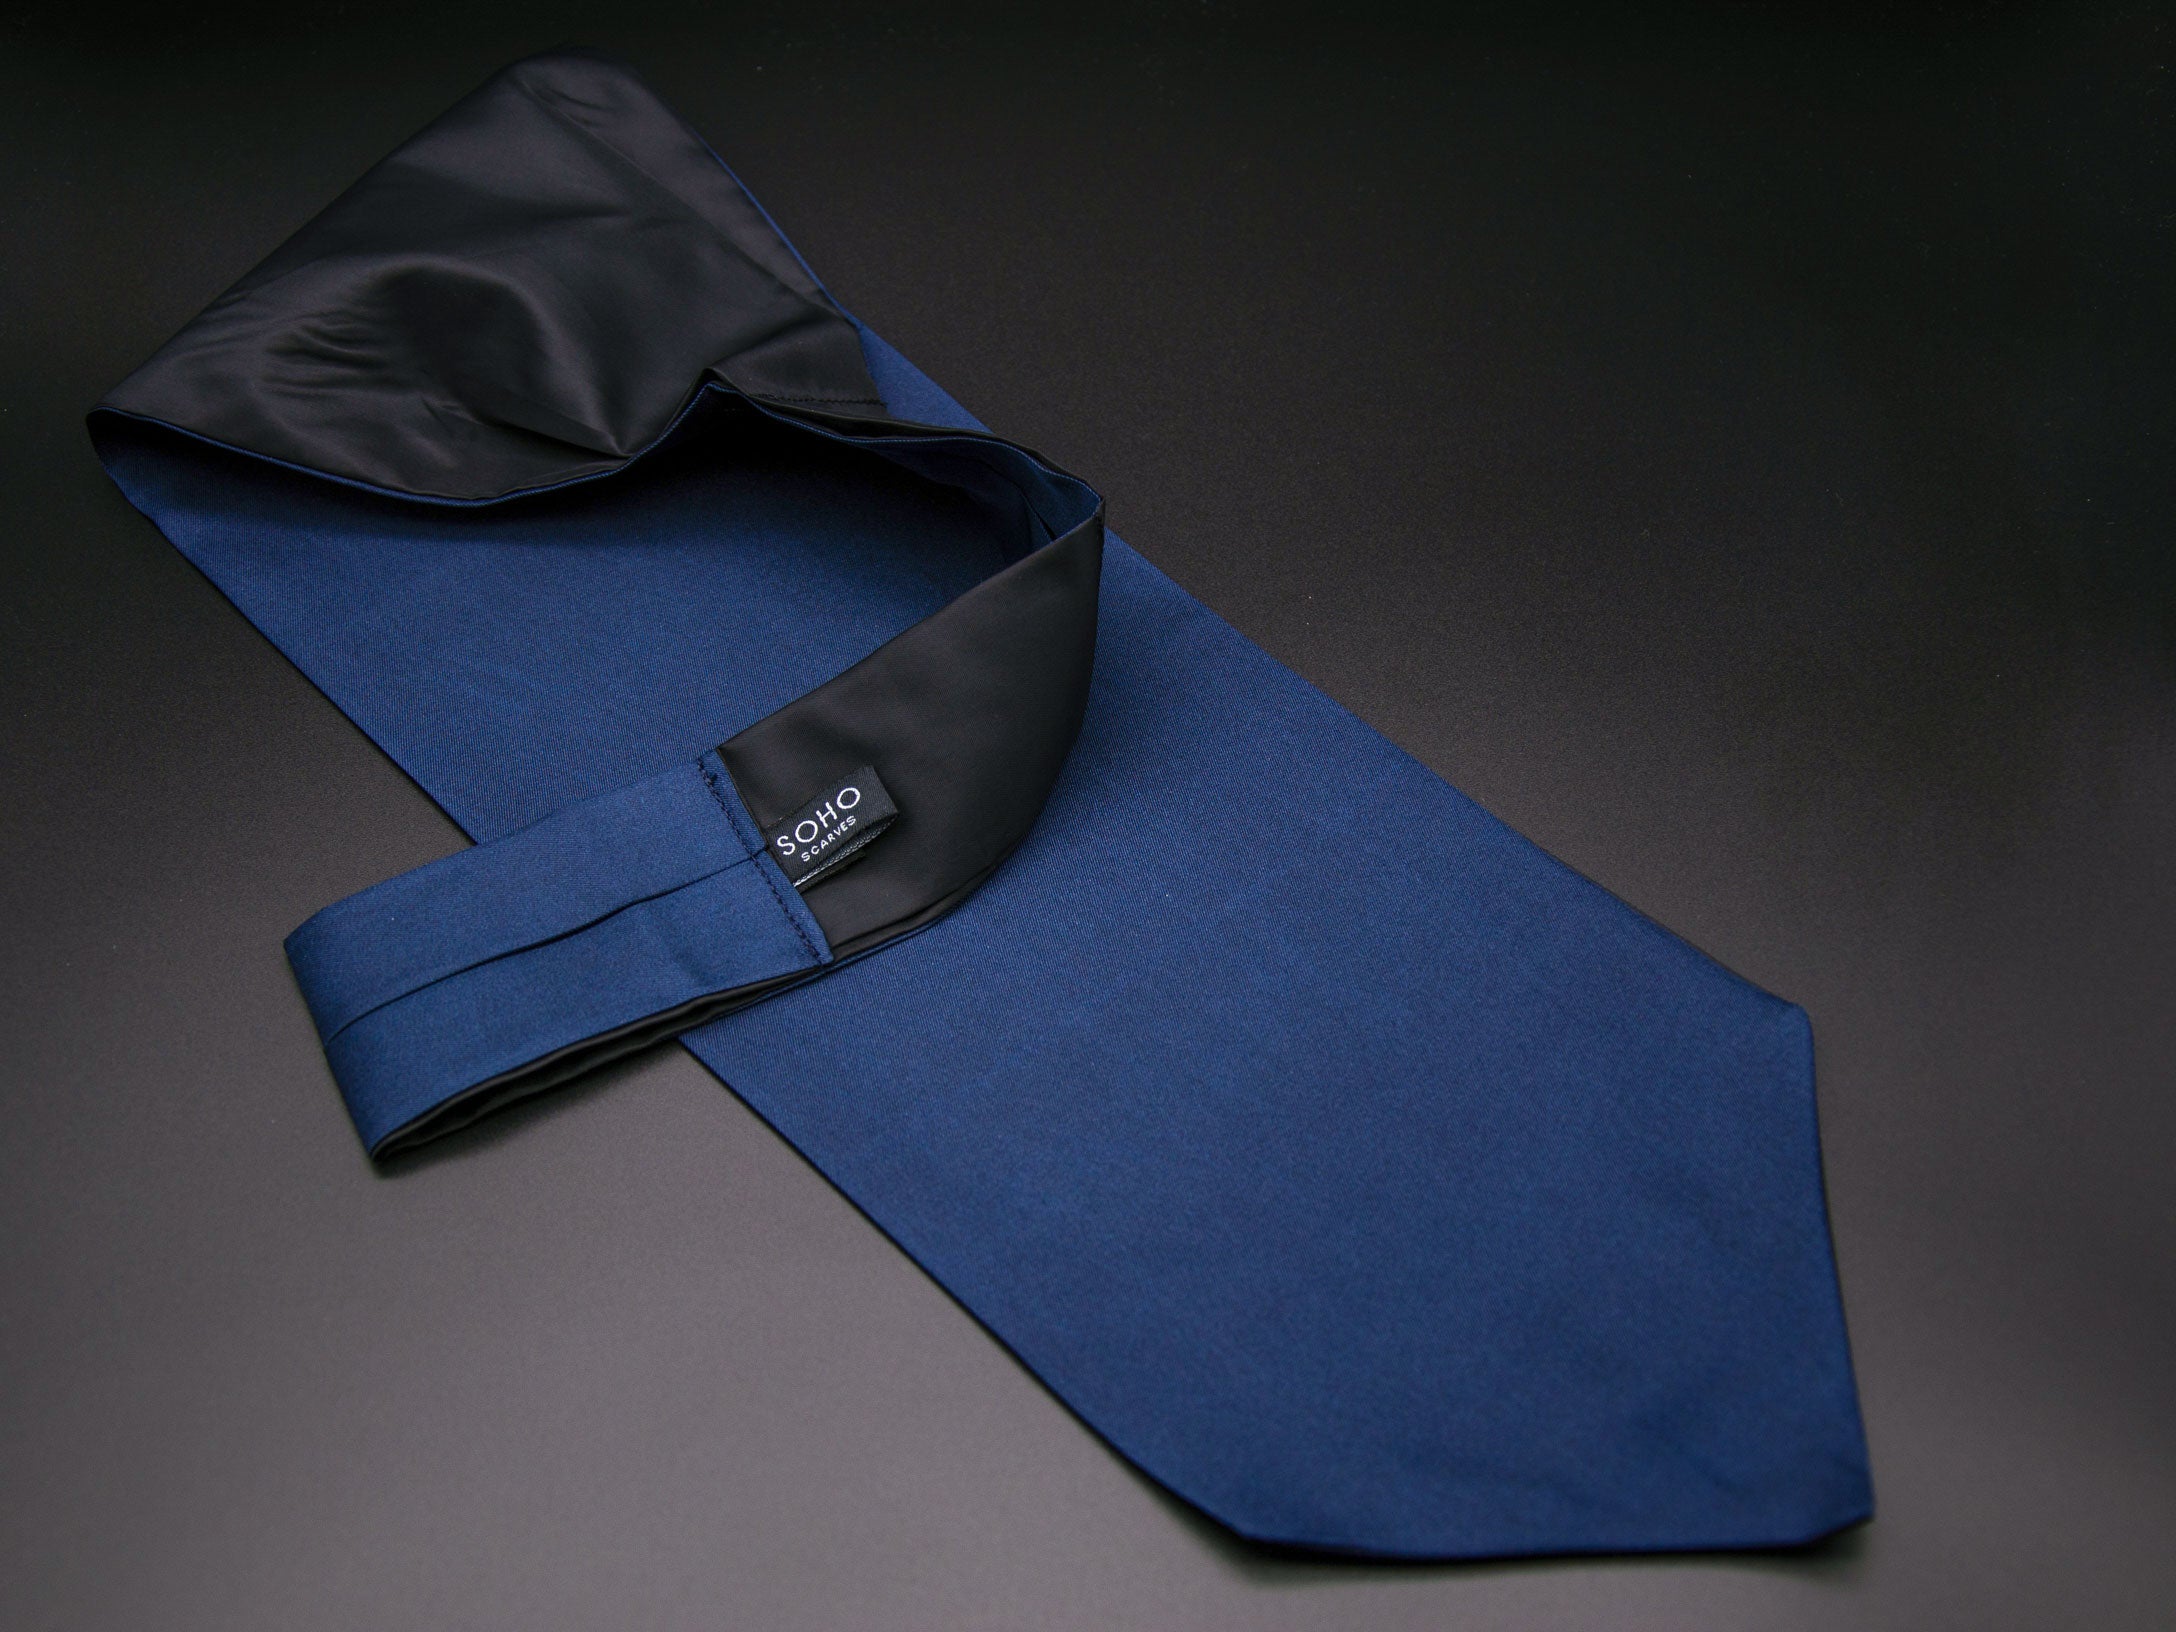 Blue 'Sebastian' single pointed Ascot tie arranged diagonally with wide point in foreground. Narrow end of tie folded back and over to reveal dark lining and 'SOHO Scarves' branding label.